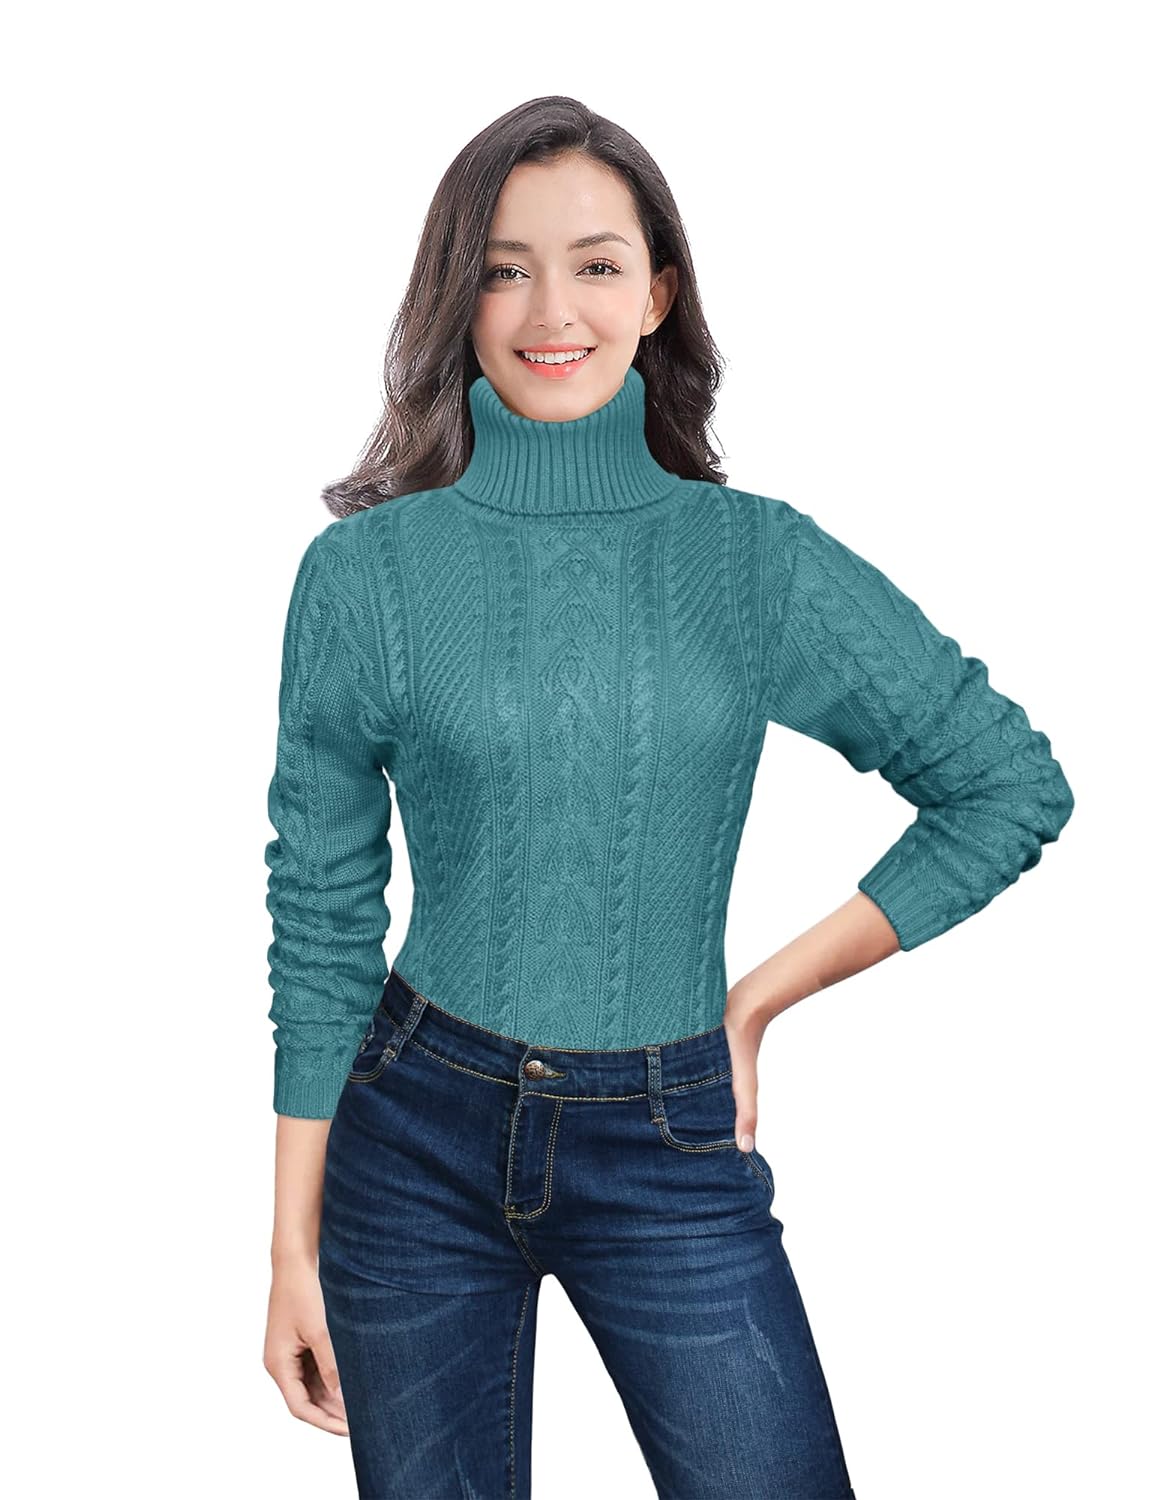 v28 Women Polo Neck Long Slim Fitted Dress Bodycon Turtleneck Cable Knit Sweater, Y Jadeblue, Small